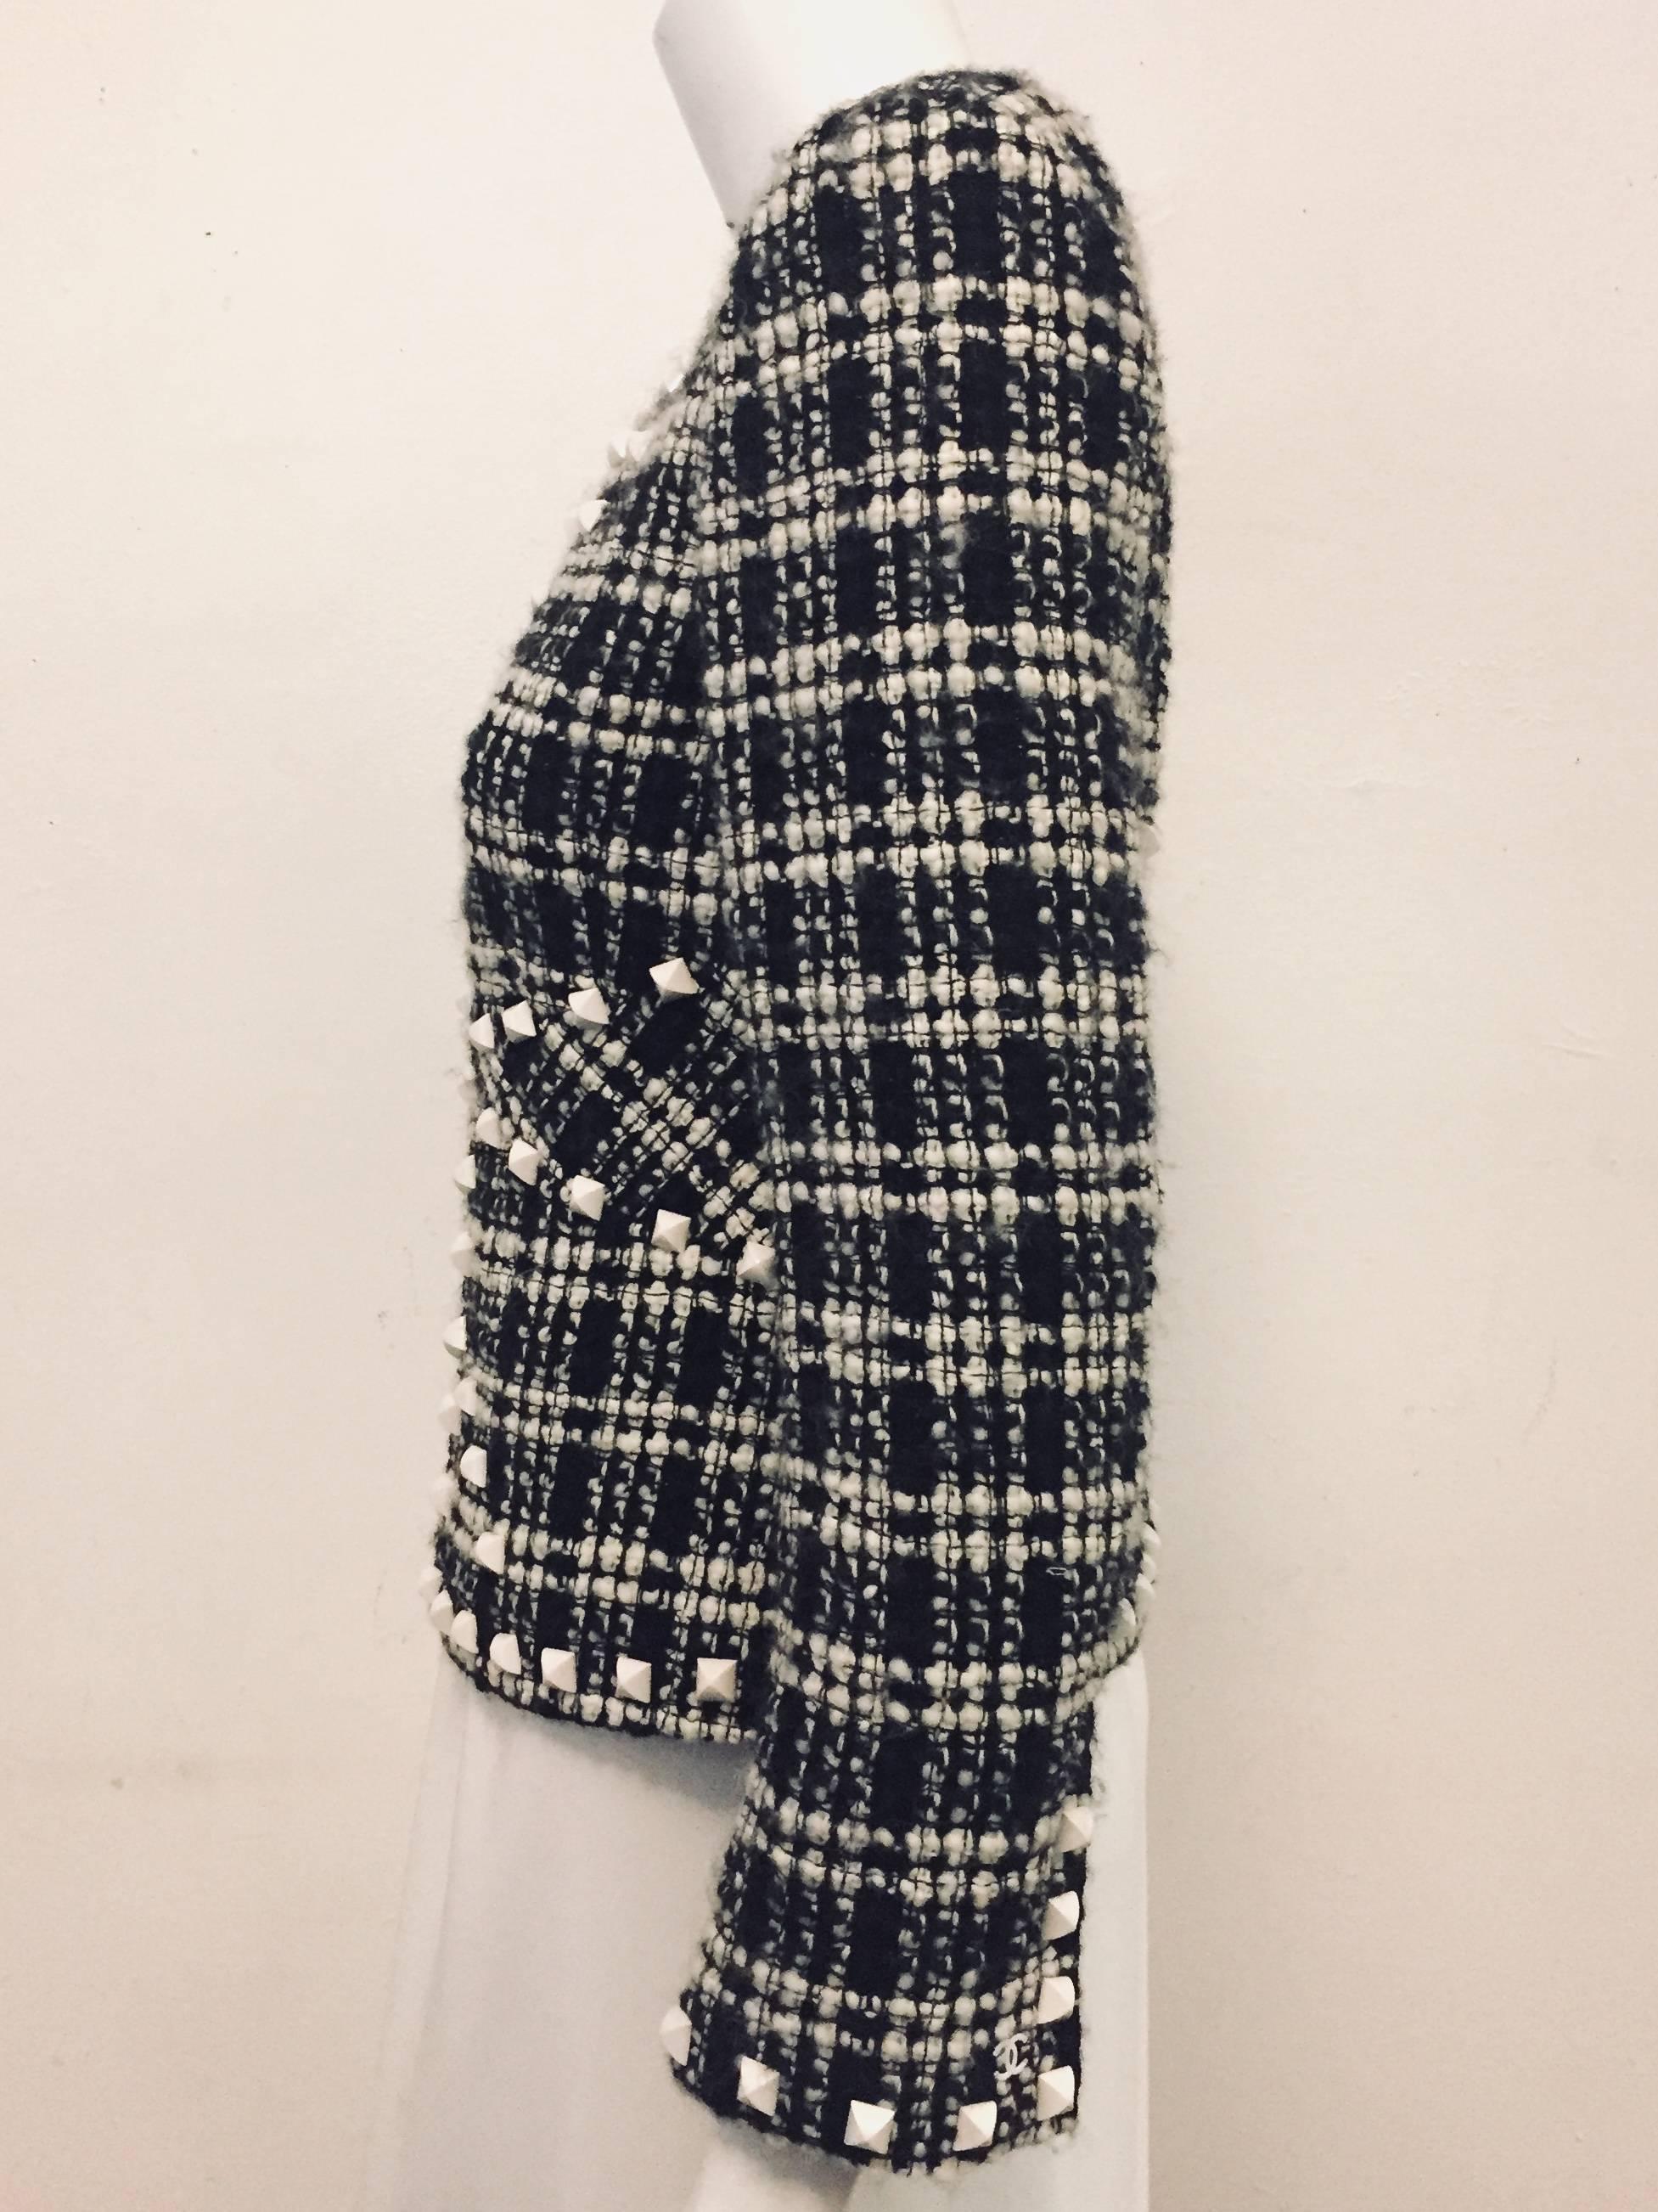 Women's  Chanel  Black & White Tweed Jacket with White Rockstuds Throughout